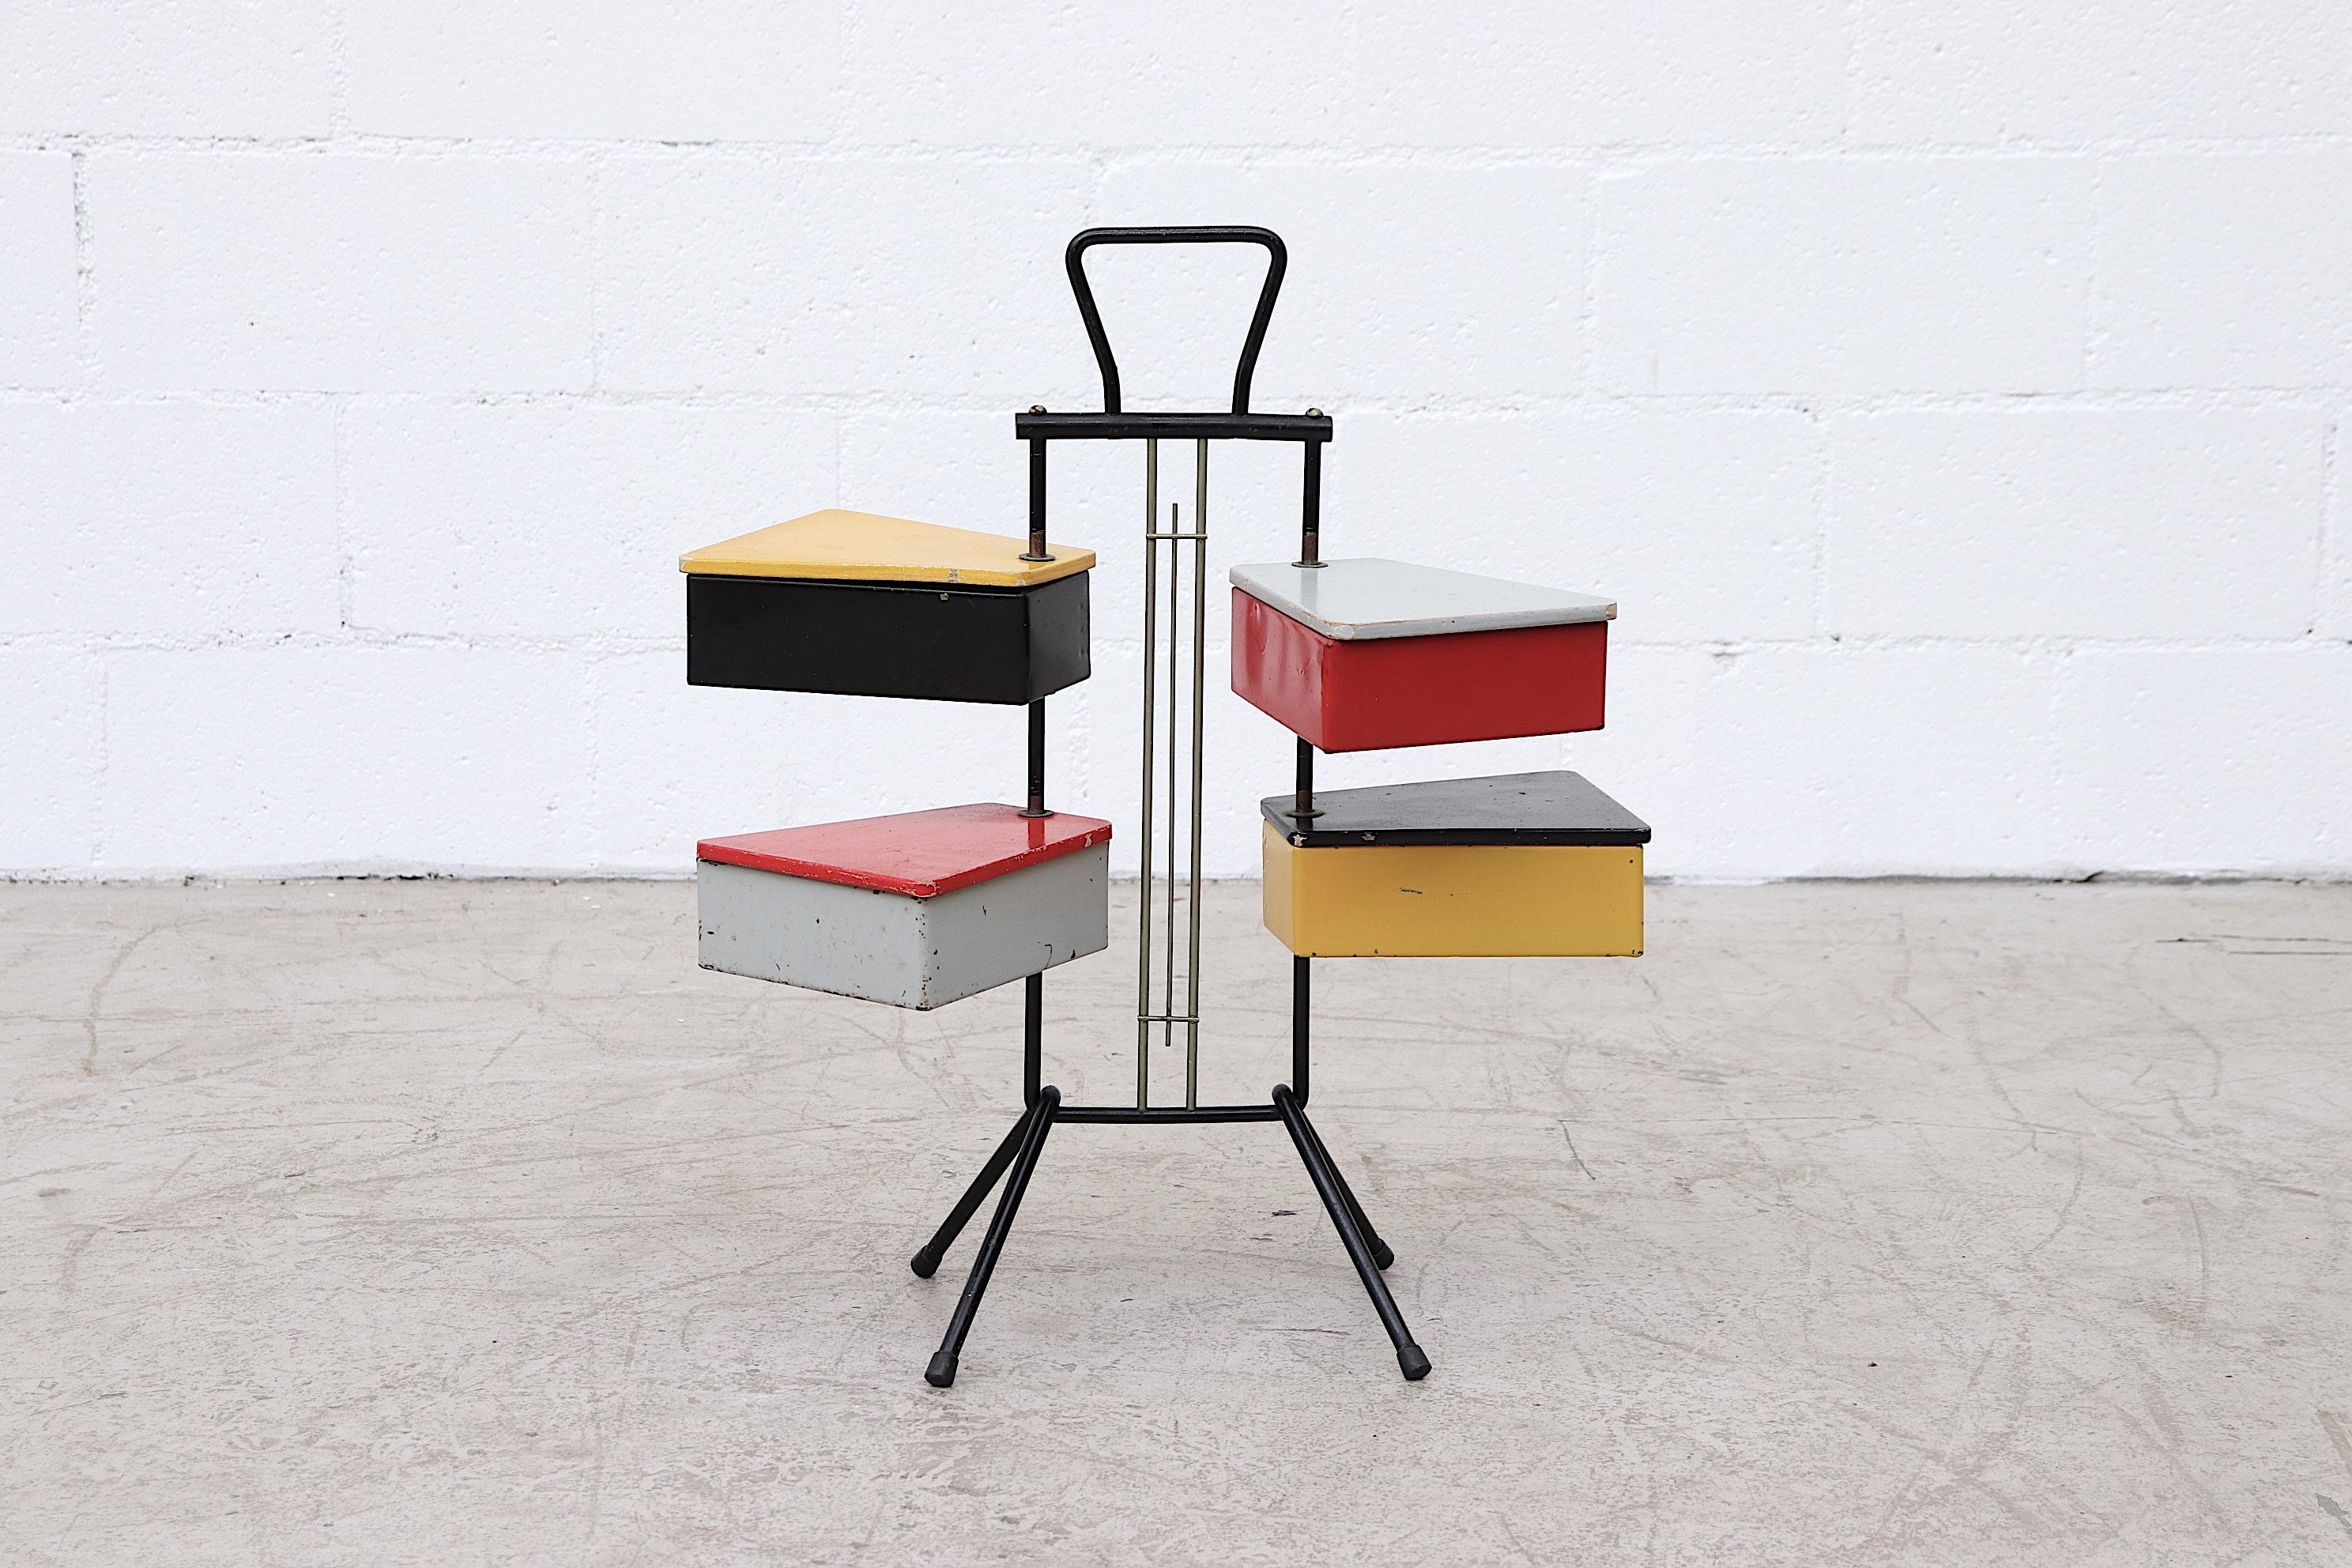 Colorful Rietveld style, 1950s sewing stand by Joos Teders for Metalux, black metal tripod stand, with Chrome accents and colored metal boxes with colored plywood lids. Both lacquered metal containers and lids swivel around the metal stand. Visibly